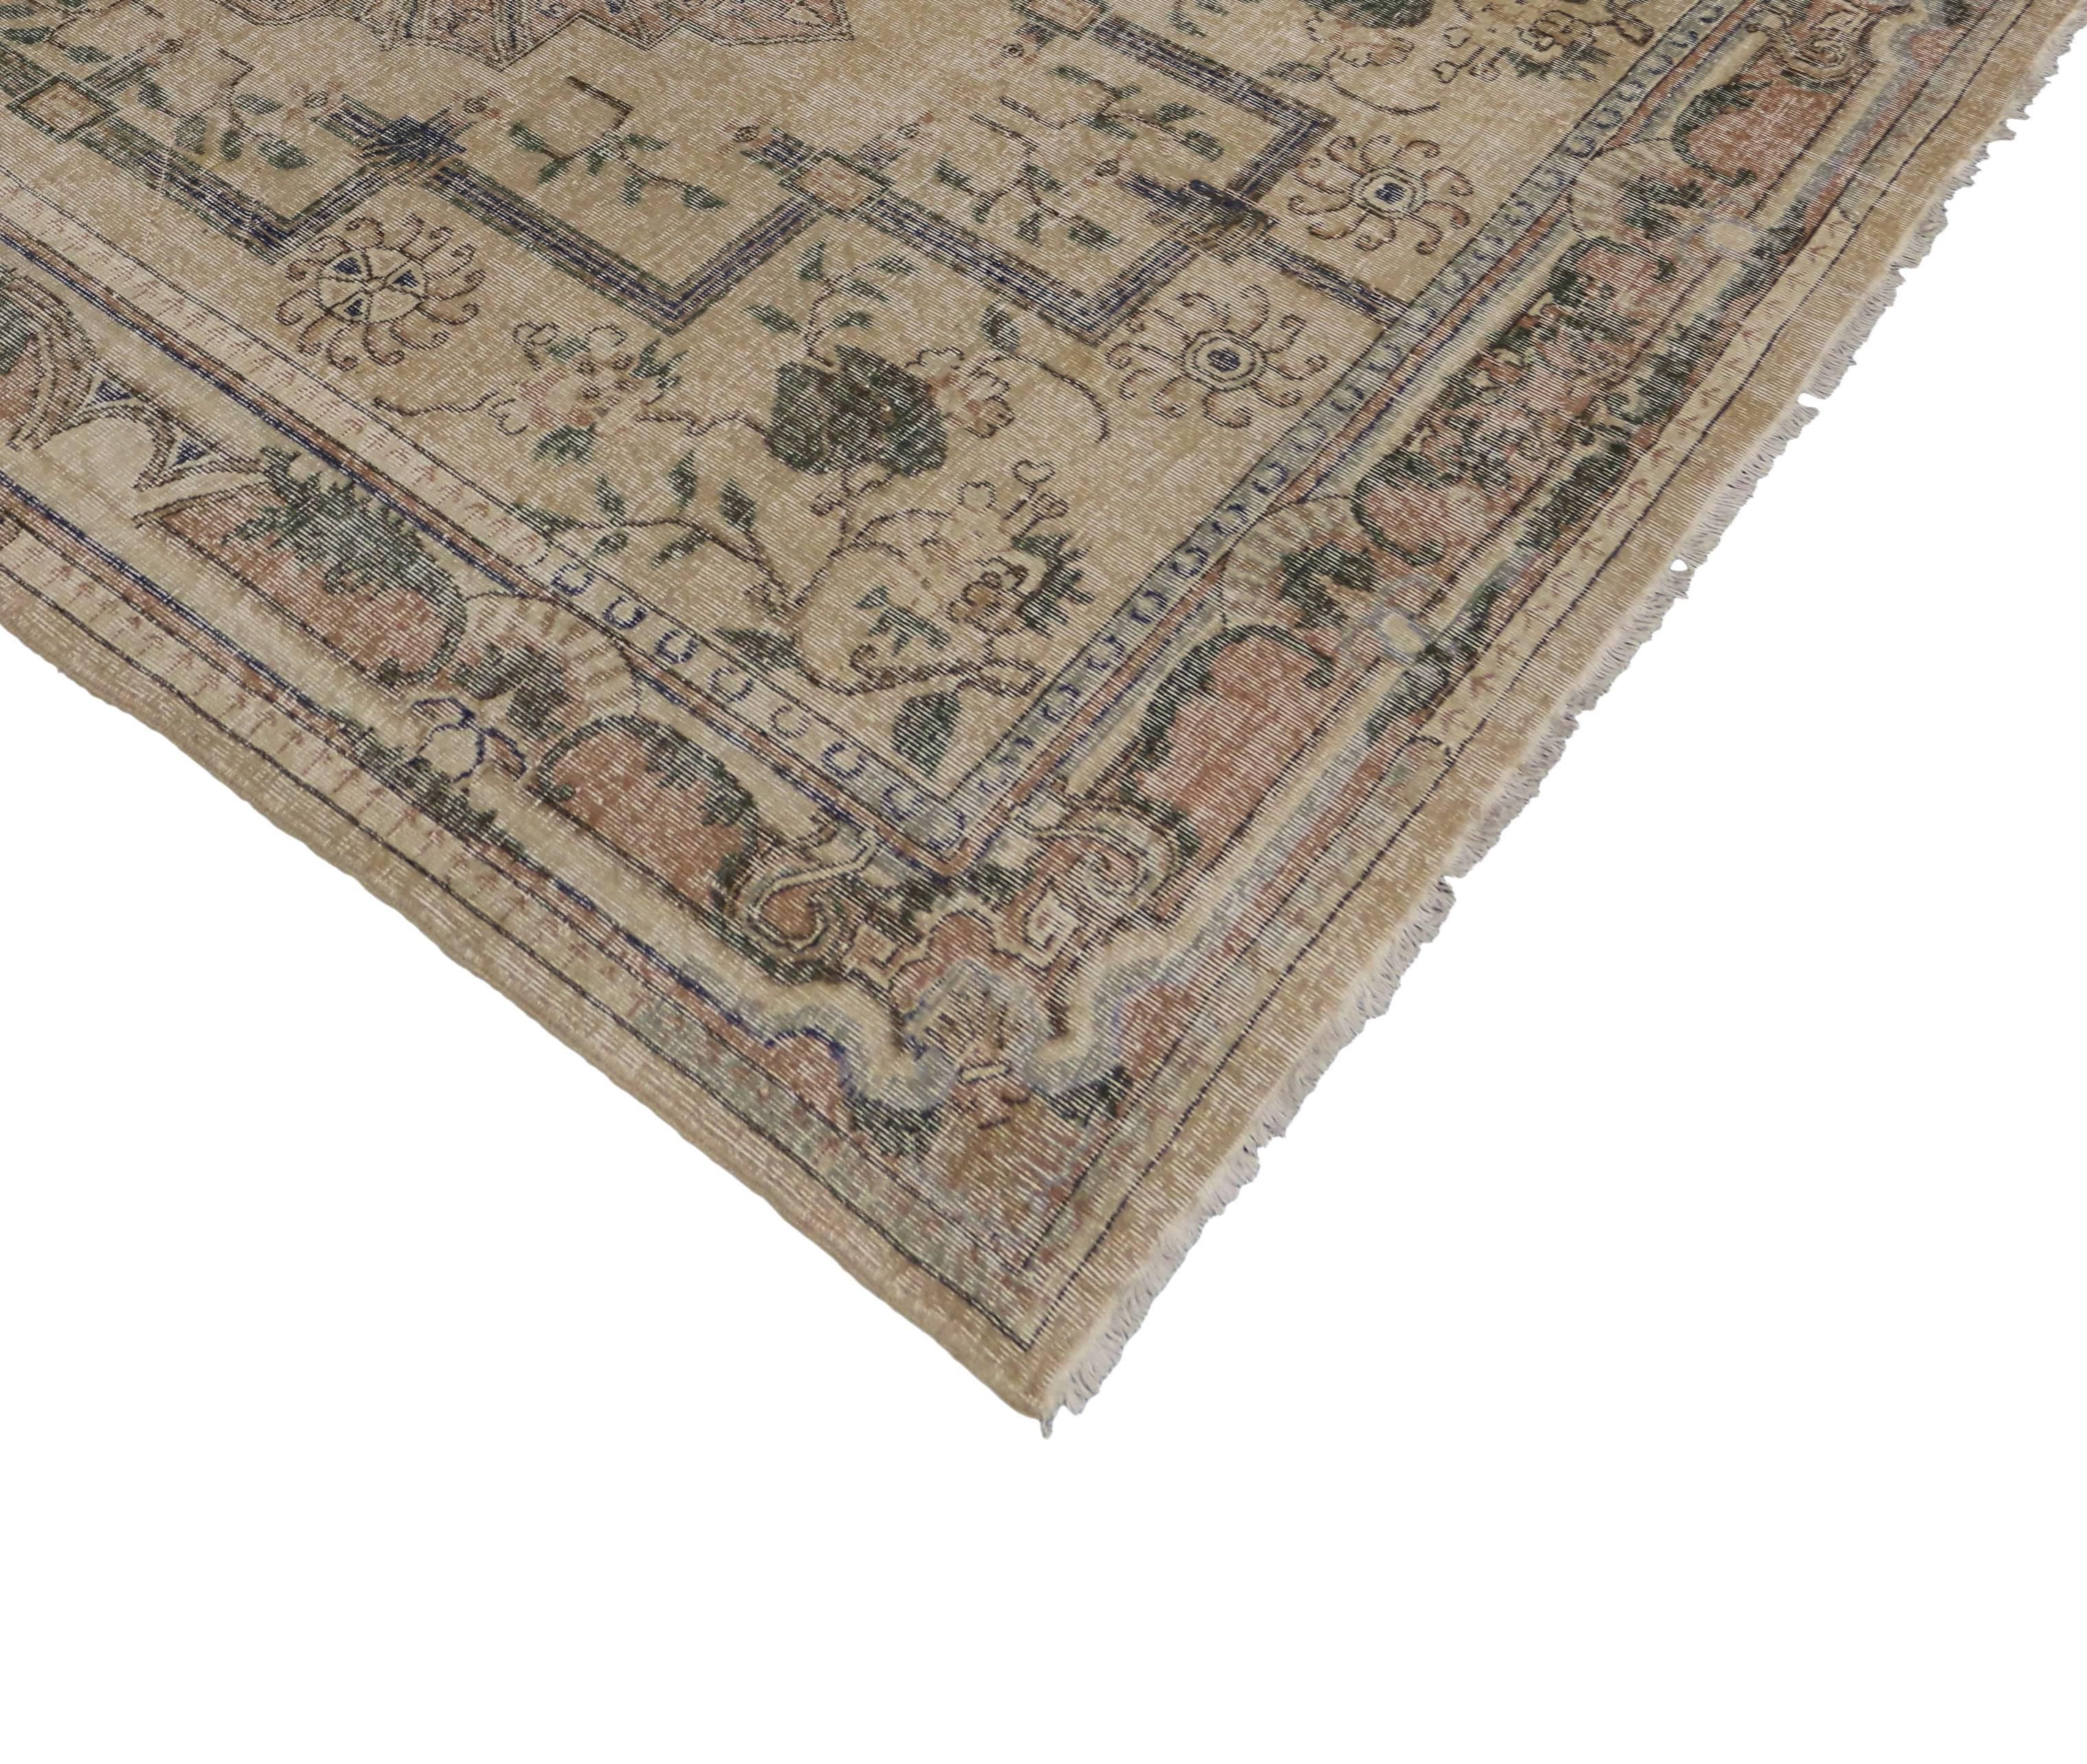 50869 Distressed Vintage Turkish Sivas Area Rug with Rustic Art Deco Cottage Charm. This hand-knotted wool distressed vintage Turkish Sivas rug features a center medallion surrounded by leafy tendrils surrounded by a rectilinear banded outline. The